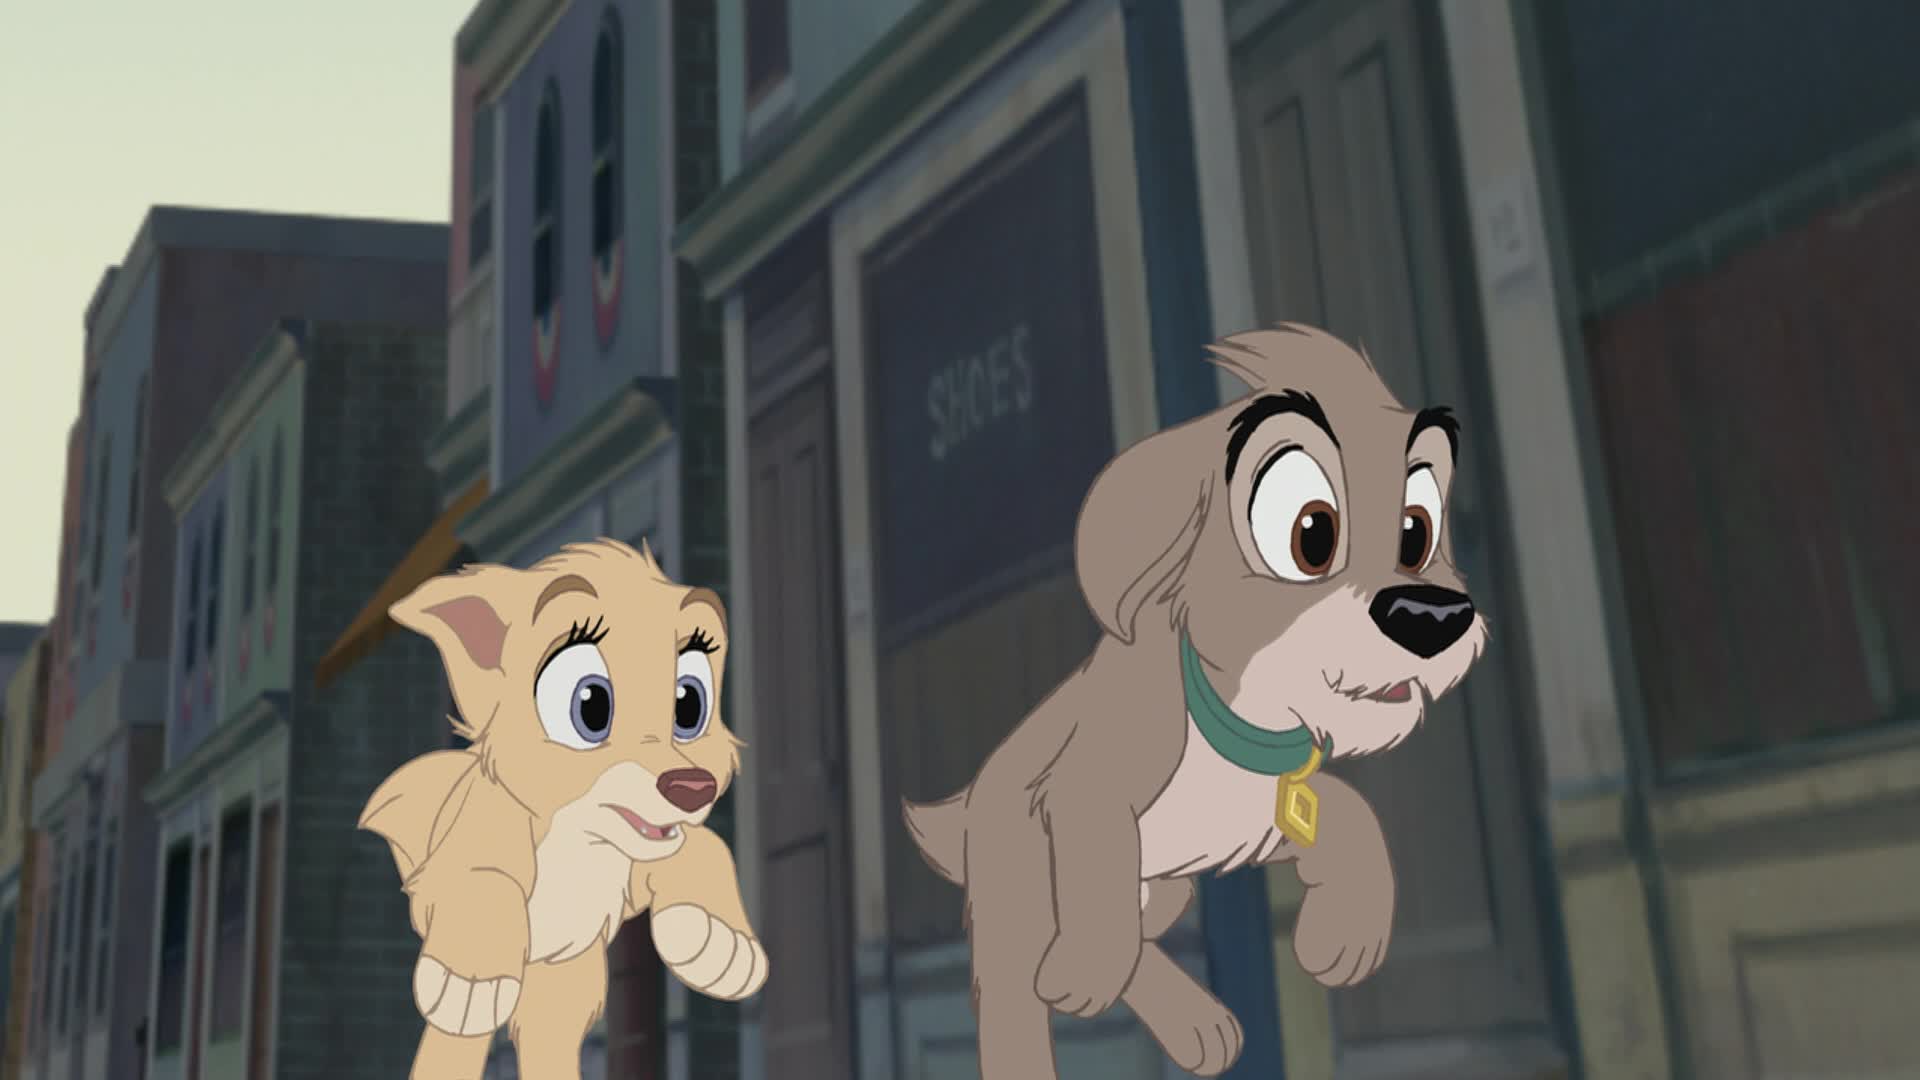 Lady and the Tramp Wallpaper High Quality